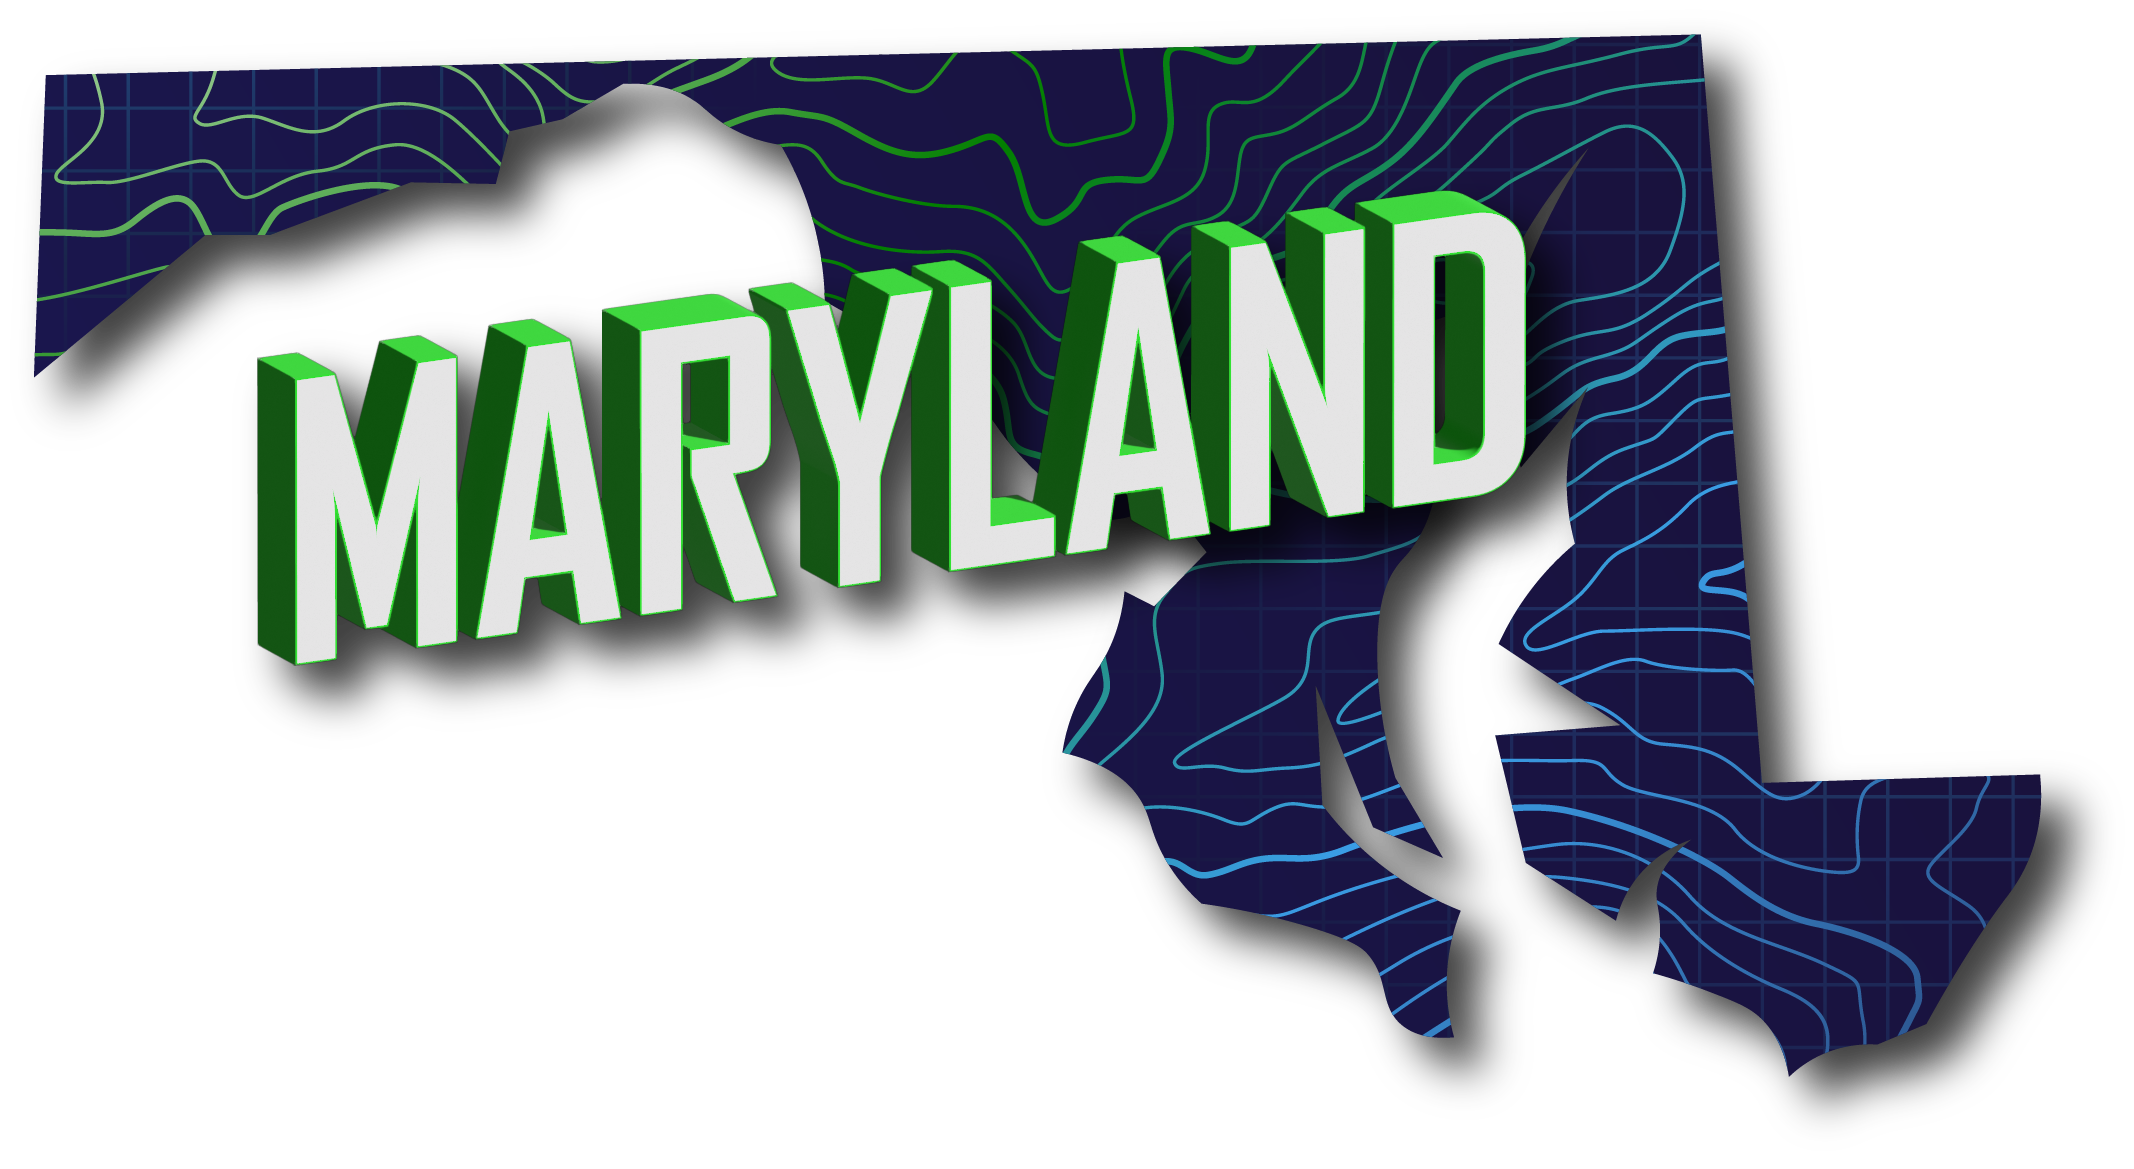 Shape of Maryland with topographic patterns and word MARYLAND written across it